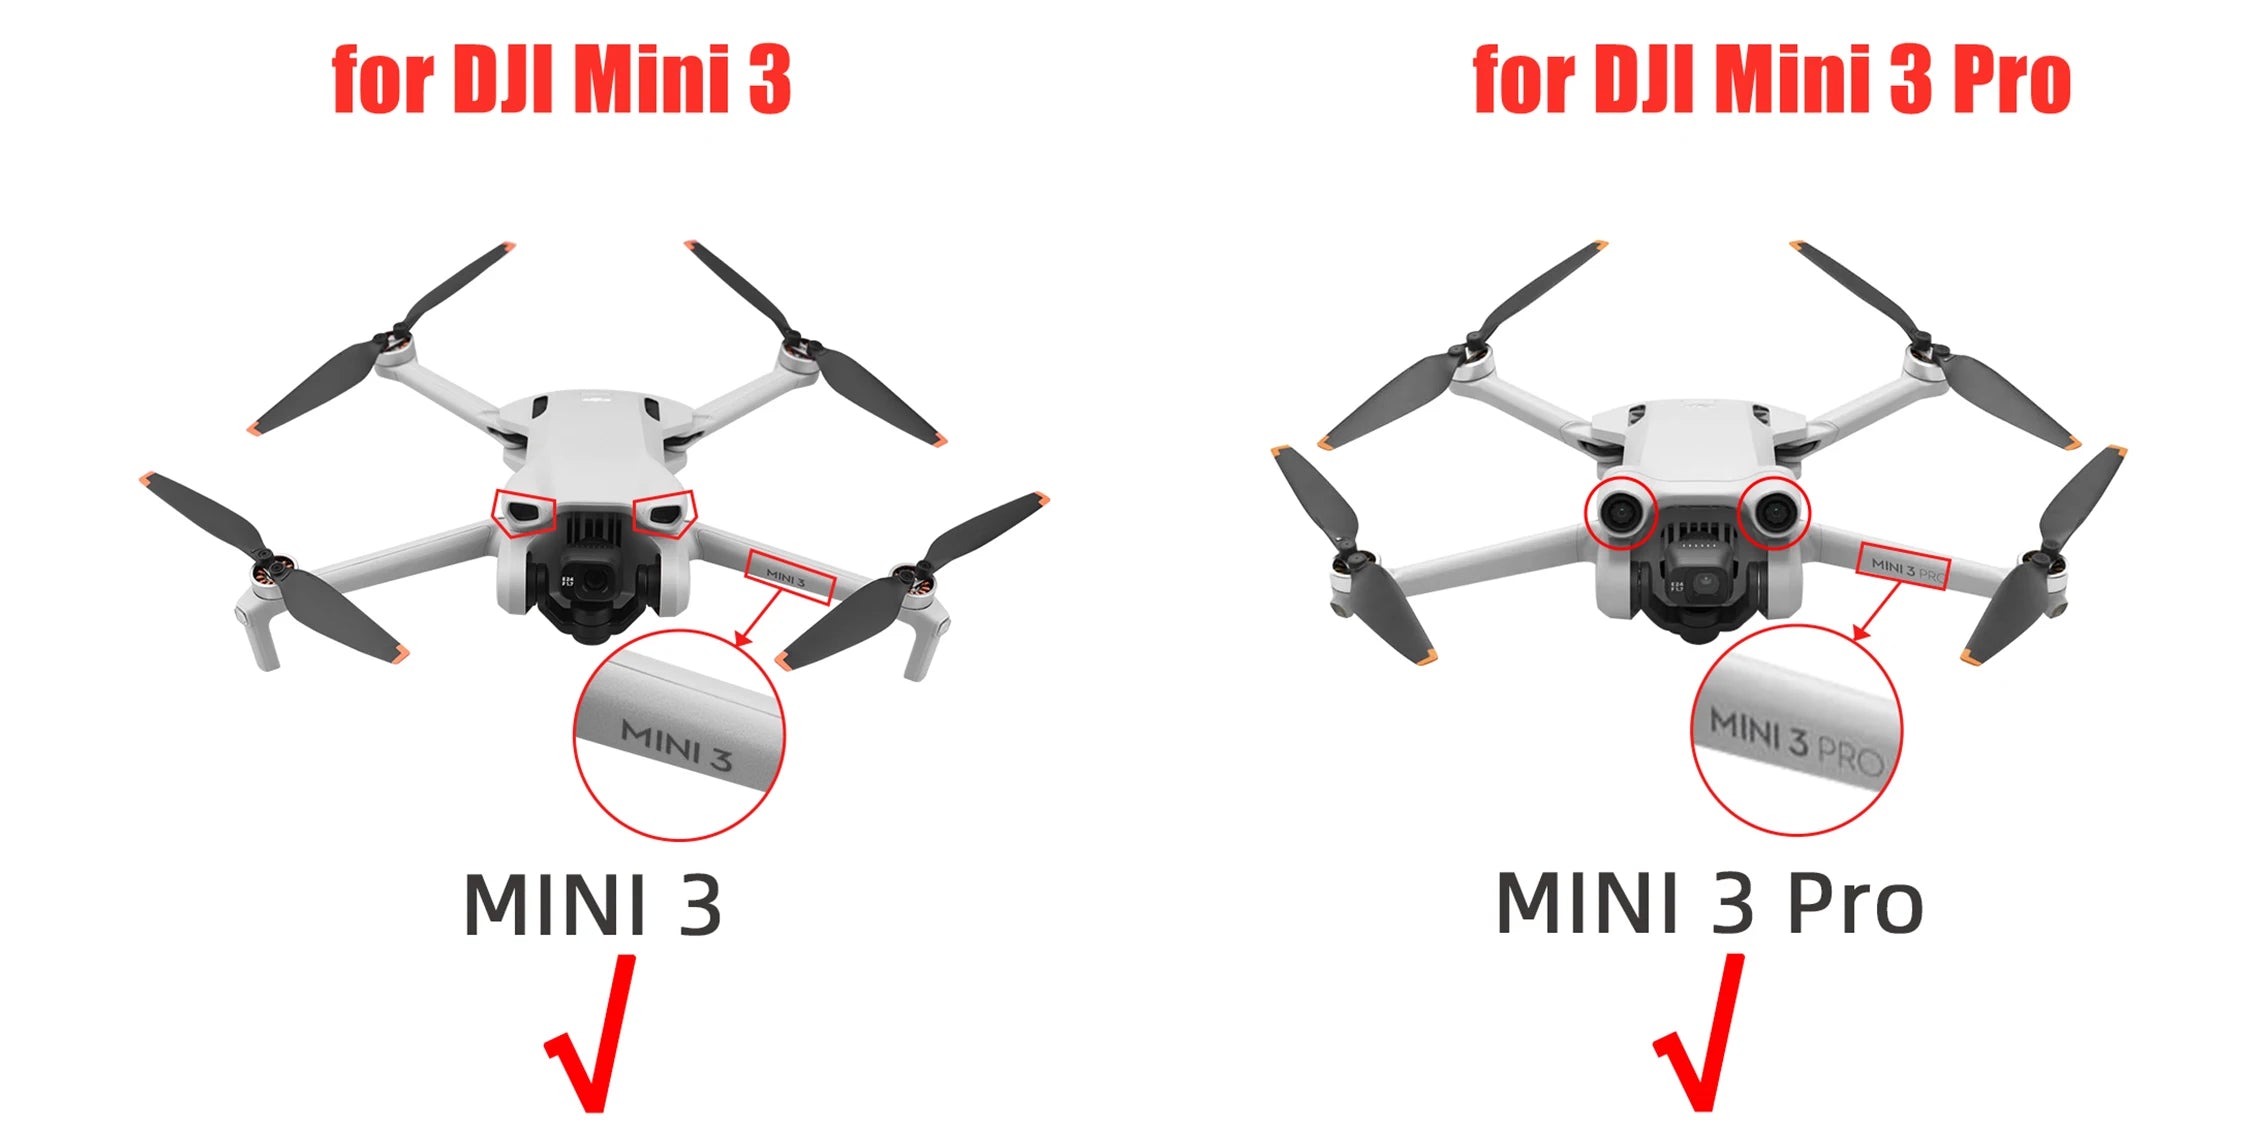 Battery Holder for DJI Mini 3 Pro, please make sure you don't mind before ordering .